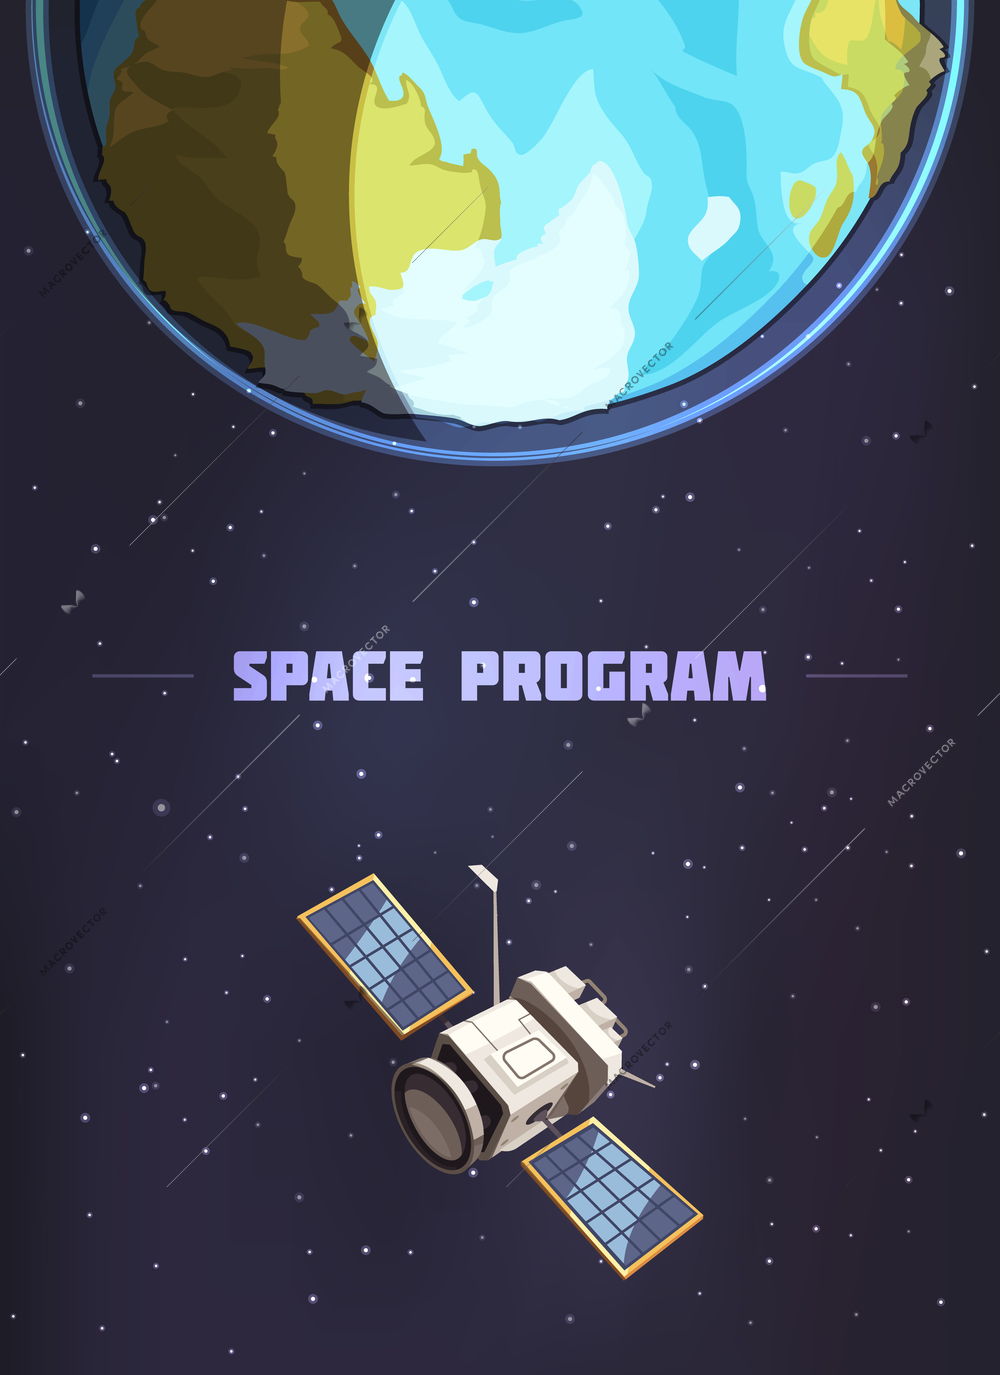 Space program poster with artificial earth satellite flying against starry sky cartoon vector illustration